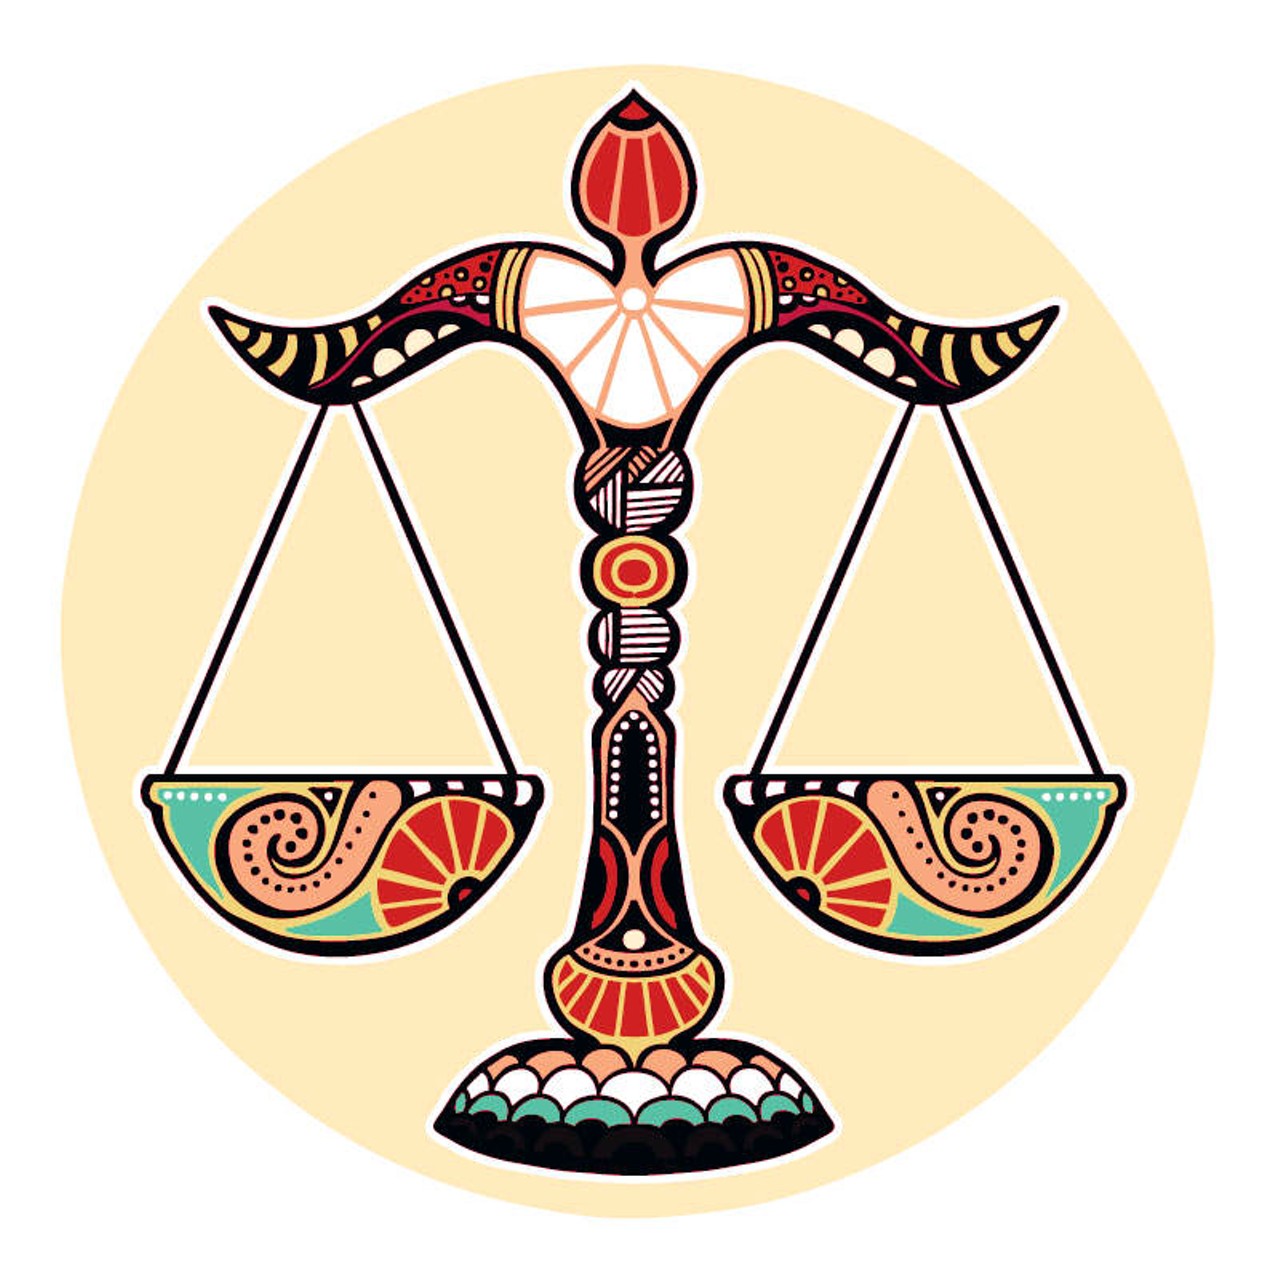 LIBRA (Sept. 21-Oct. 20): 
It&#146;s hard for you to see past the things that you do to make life perfect. On the surface, you are the nicest person on the planet. Charming, cooperative, and willing to do anything to ease the tension, the pain, and discomfort that your radar picks up on in the world around you, anyone with these qualities would have to be just as aware of the darkness. There are times when what you&#146;re always trying to &#147;fix&#148; needs to be left alone. At the moment, keeping your fingers out of the machinery will do more to set things right than your attempts to cover up what&#146;s really going on.